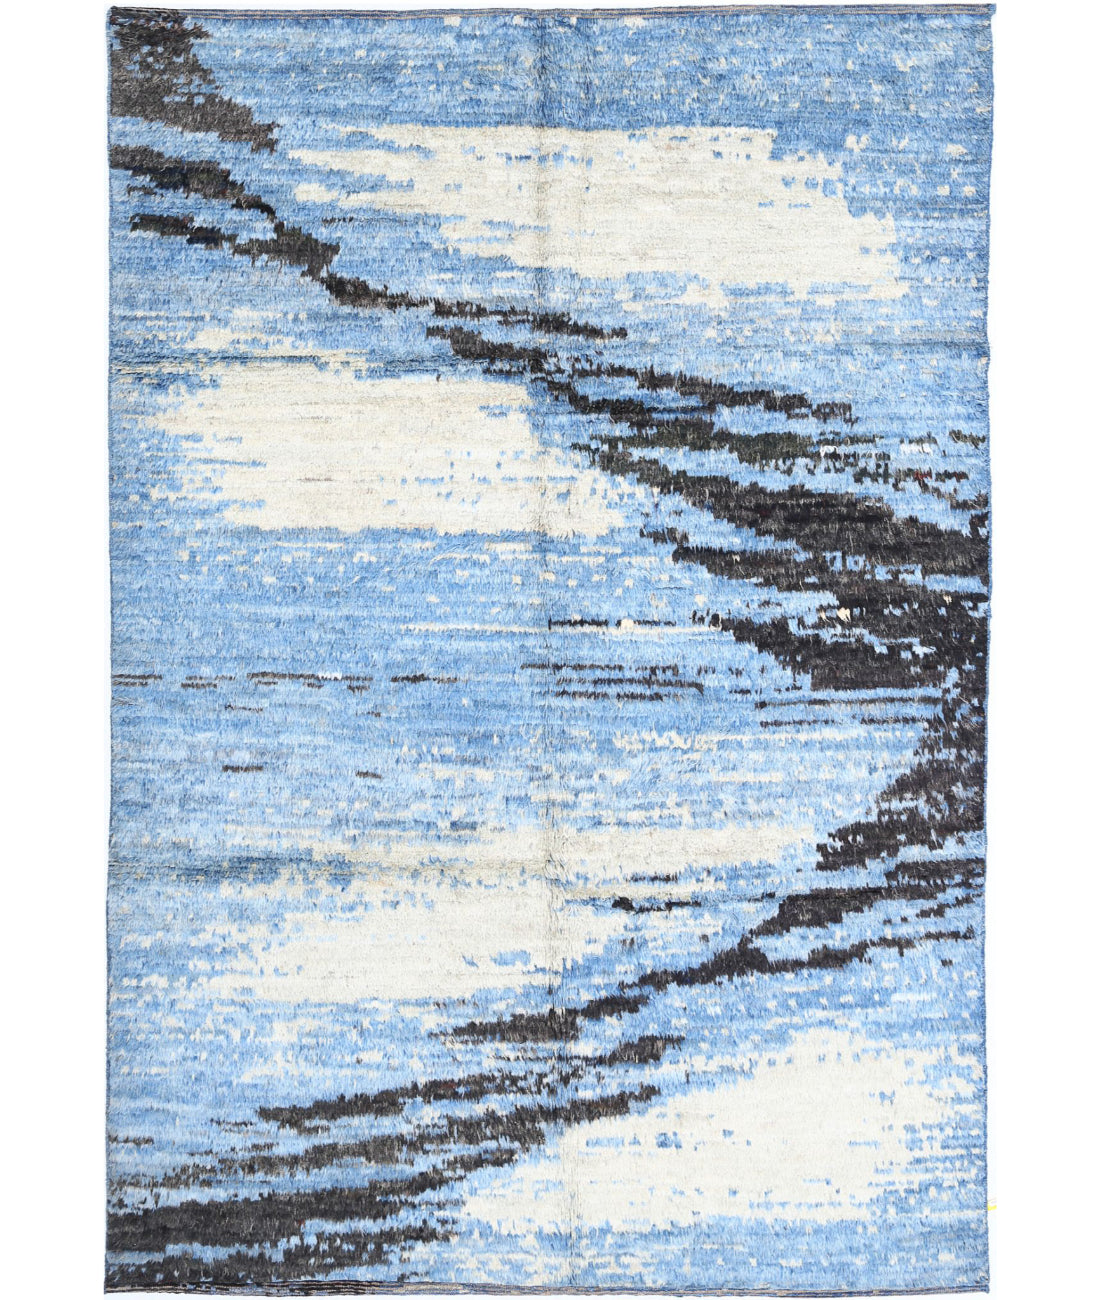 Hand Knotted Tribal Moroccan Wool Rug - 6'3'' x 9'8'' 6'3'' x 9'8'' (188 X 290) / Blue / Blue